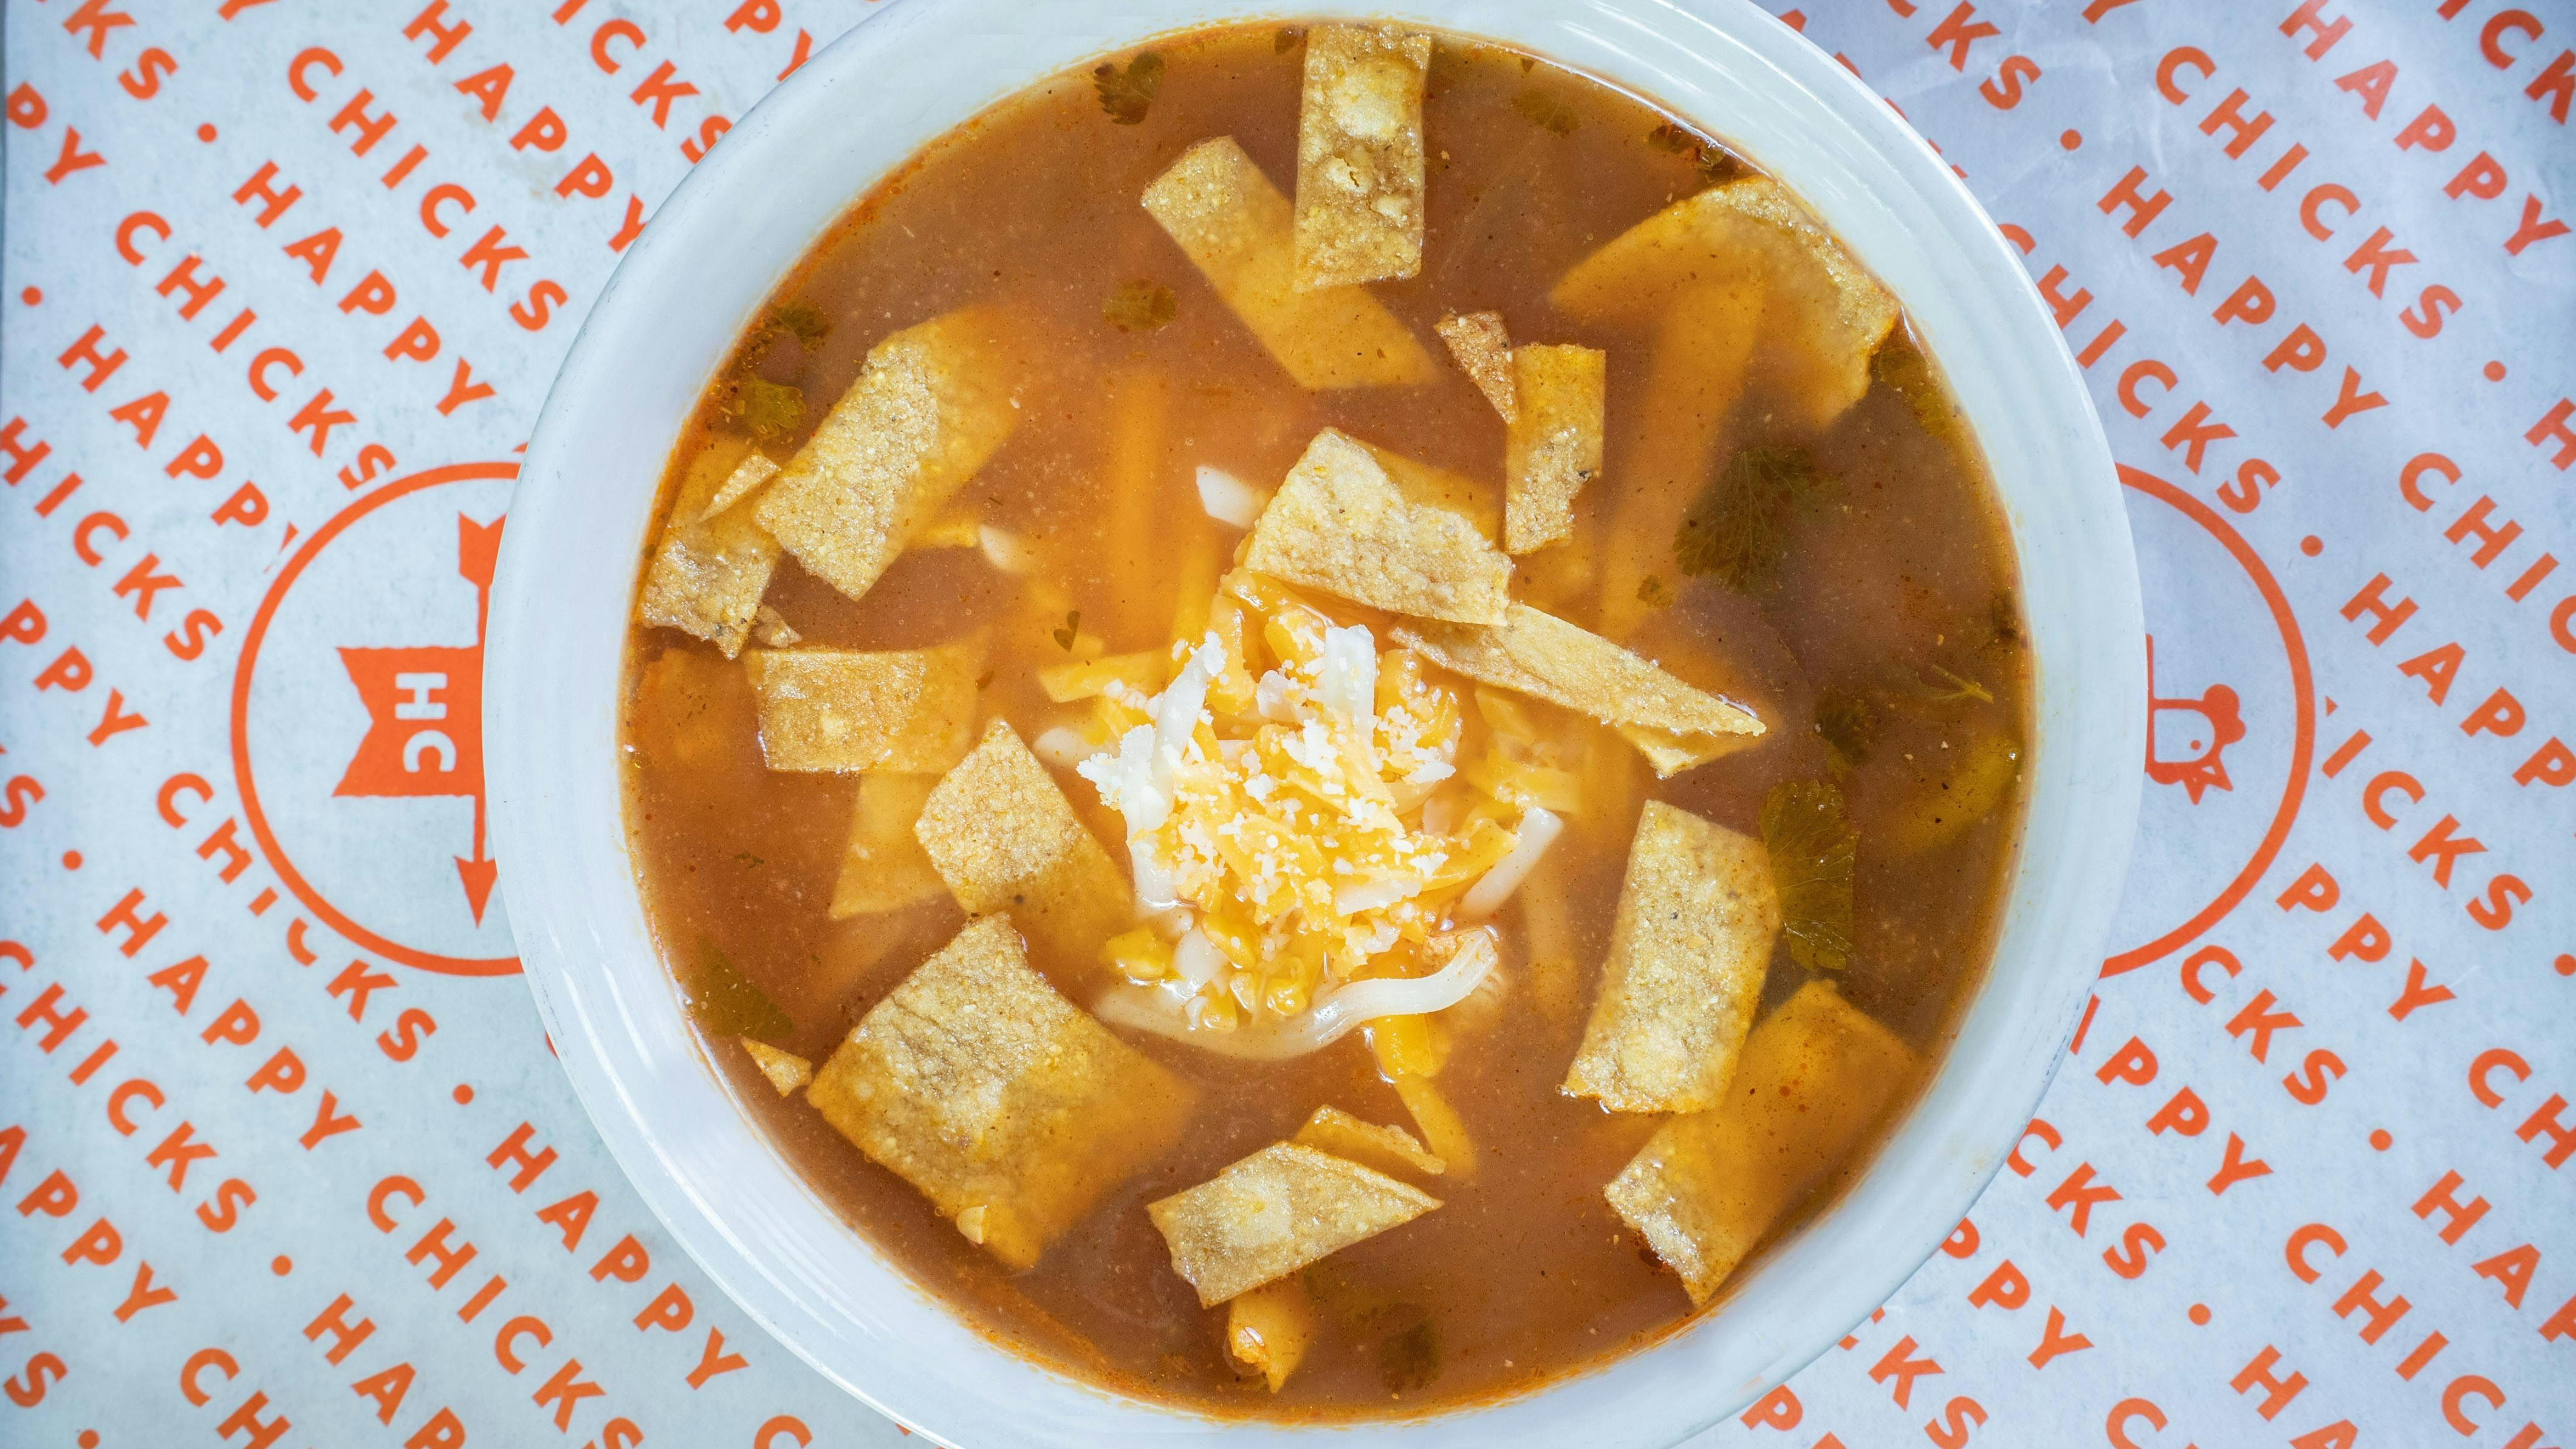 Chicken Tortilla Soup from Happy Chicks - Research Blvd in Austin, TX